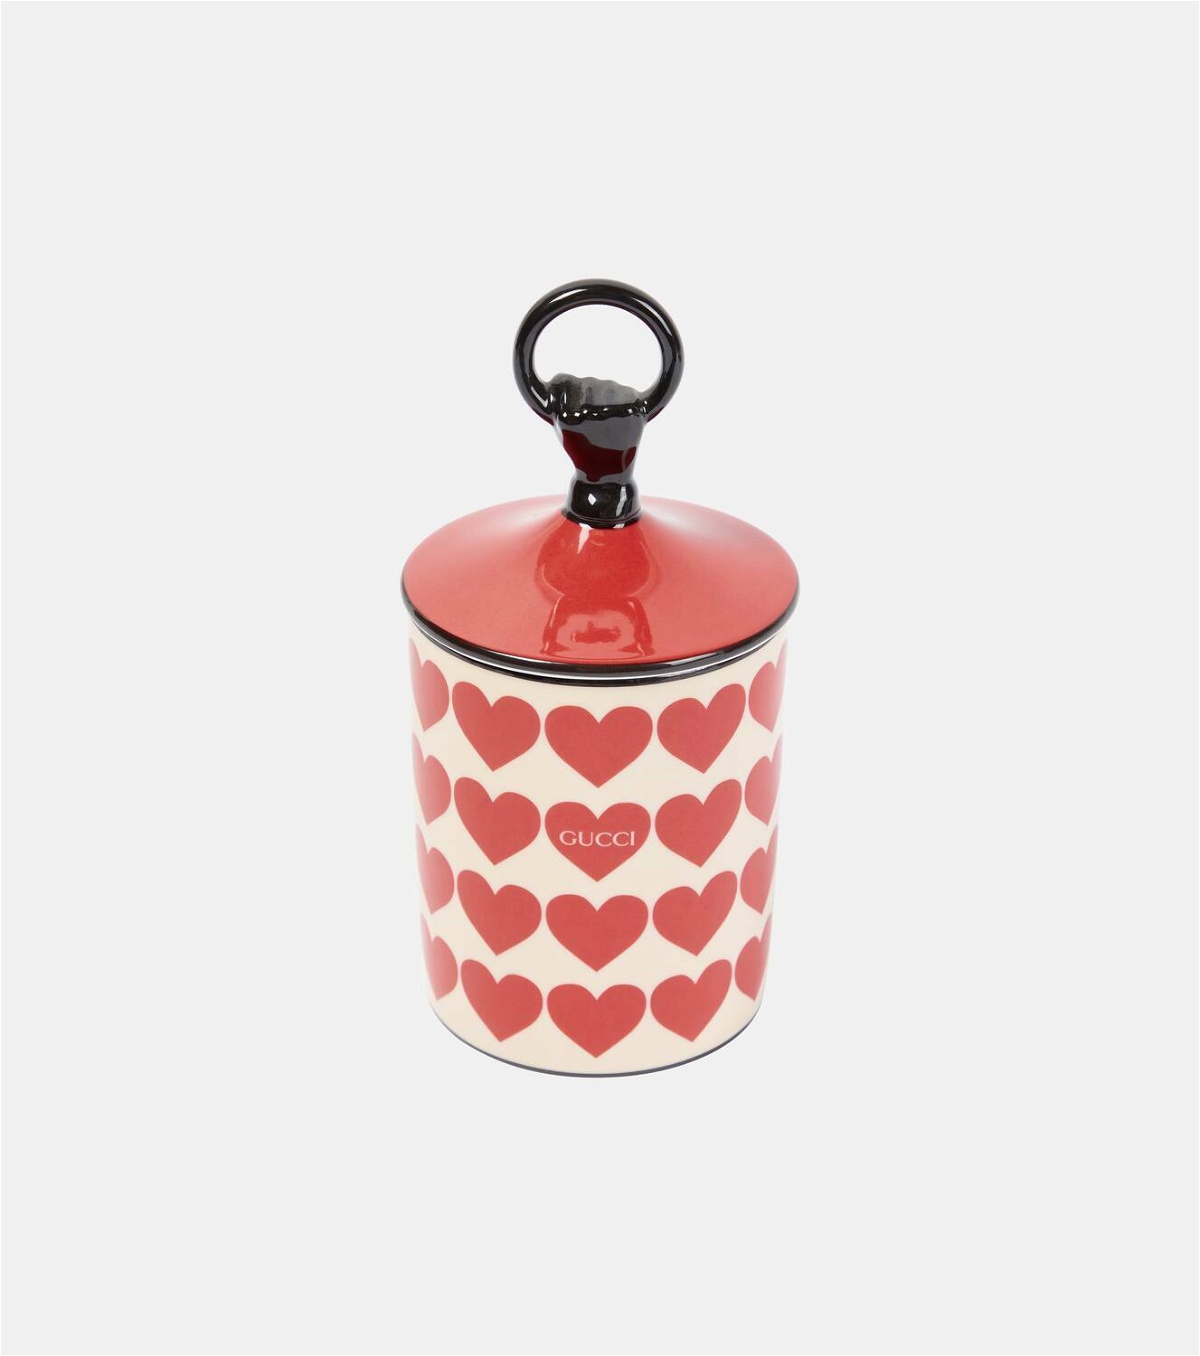 Gucci Hearts freesia scented candle